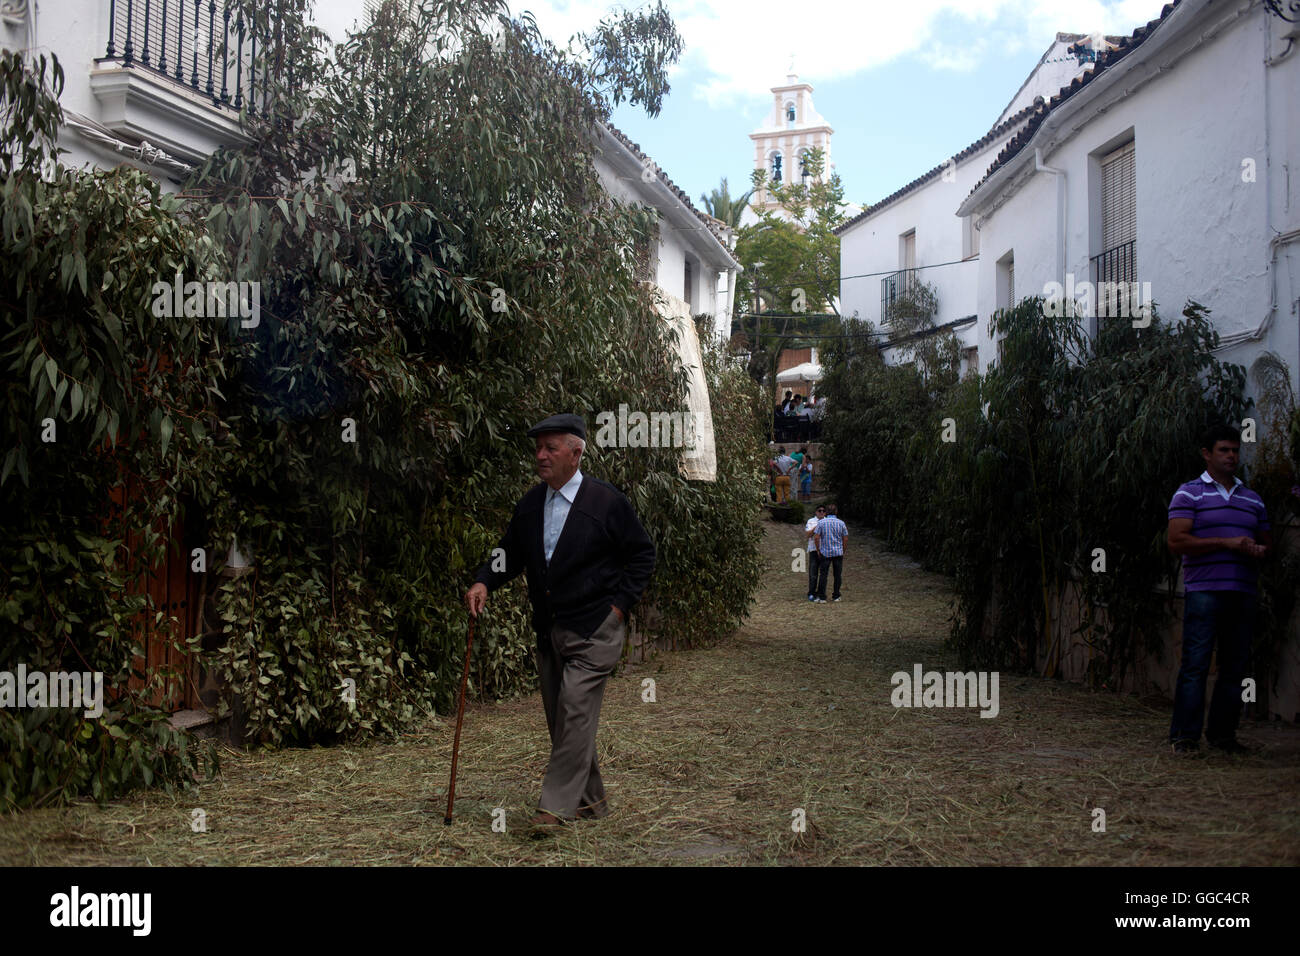 A senior man wearing a bonnet and using a walking stick walks in a street during Corpus Christi in El Gastor Stock Photo